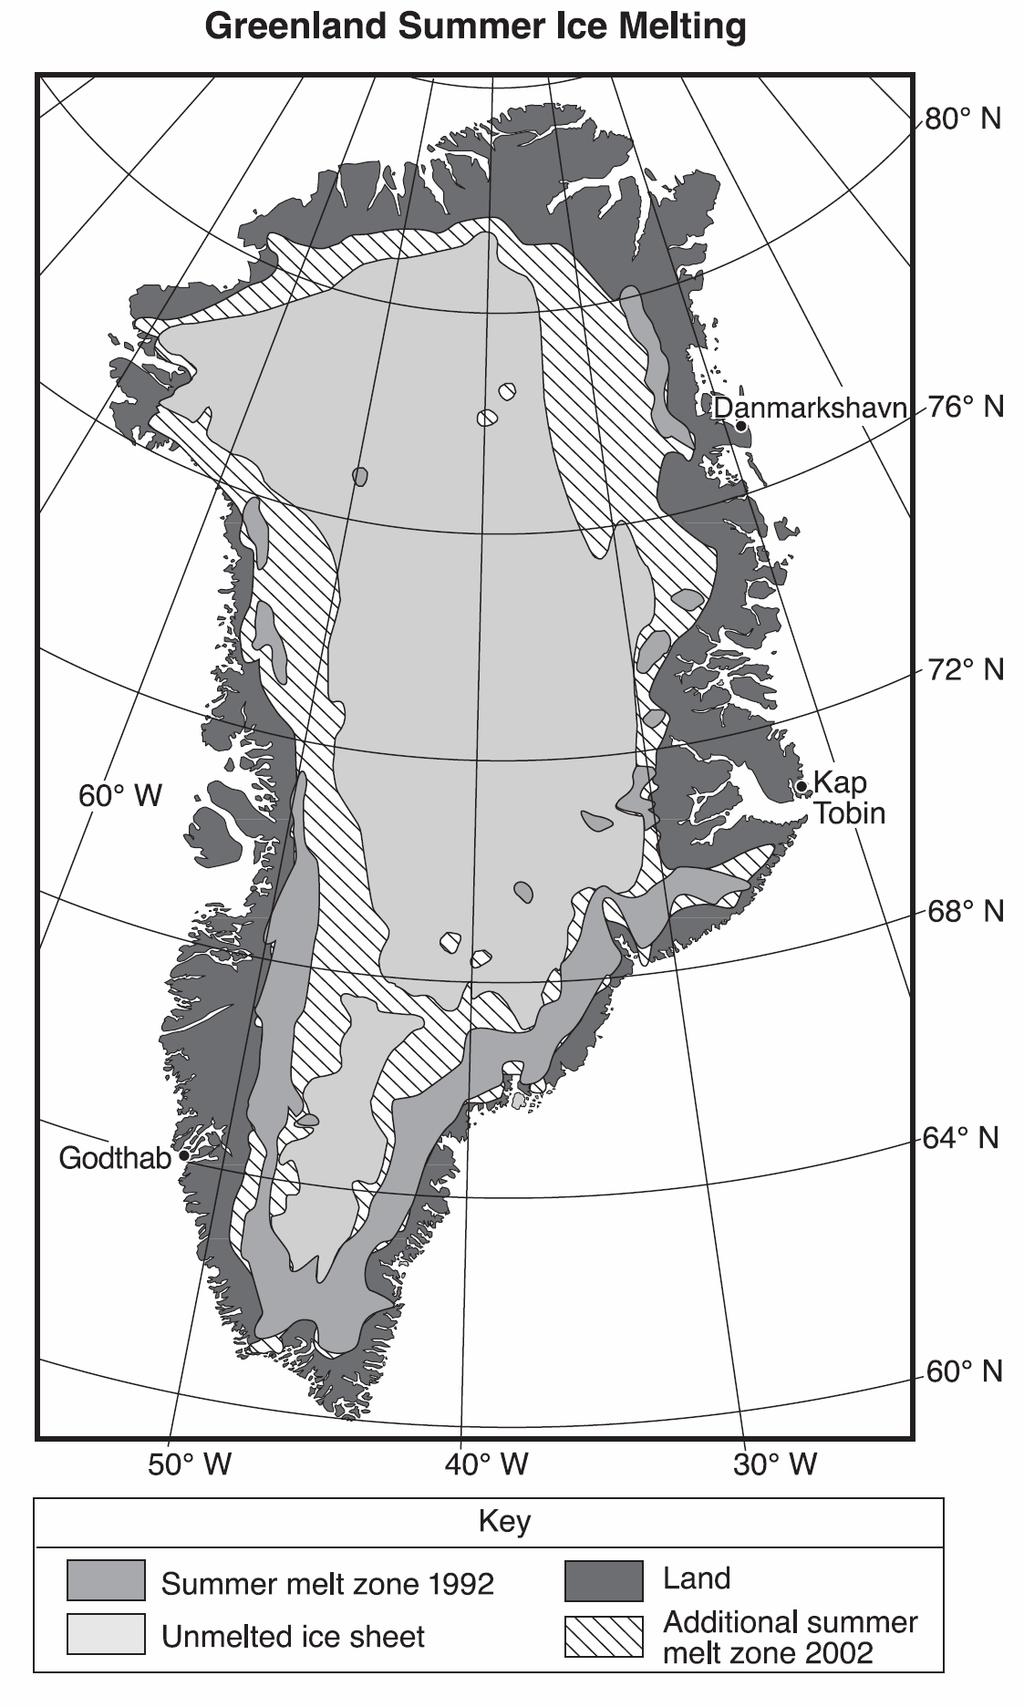 94. Base your answer to the following question on. What is the approximate latitude and longitude of Godthab, Greenland? A) 51.5 N 64 W B) 70.5 N 22 W C) 64 N 51.5 W D) 22 N 70.5 W 95.